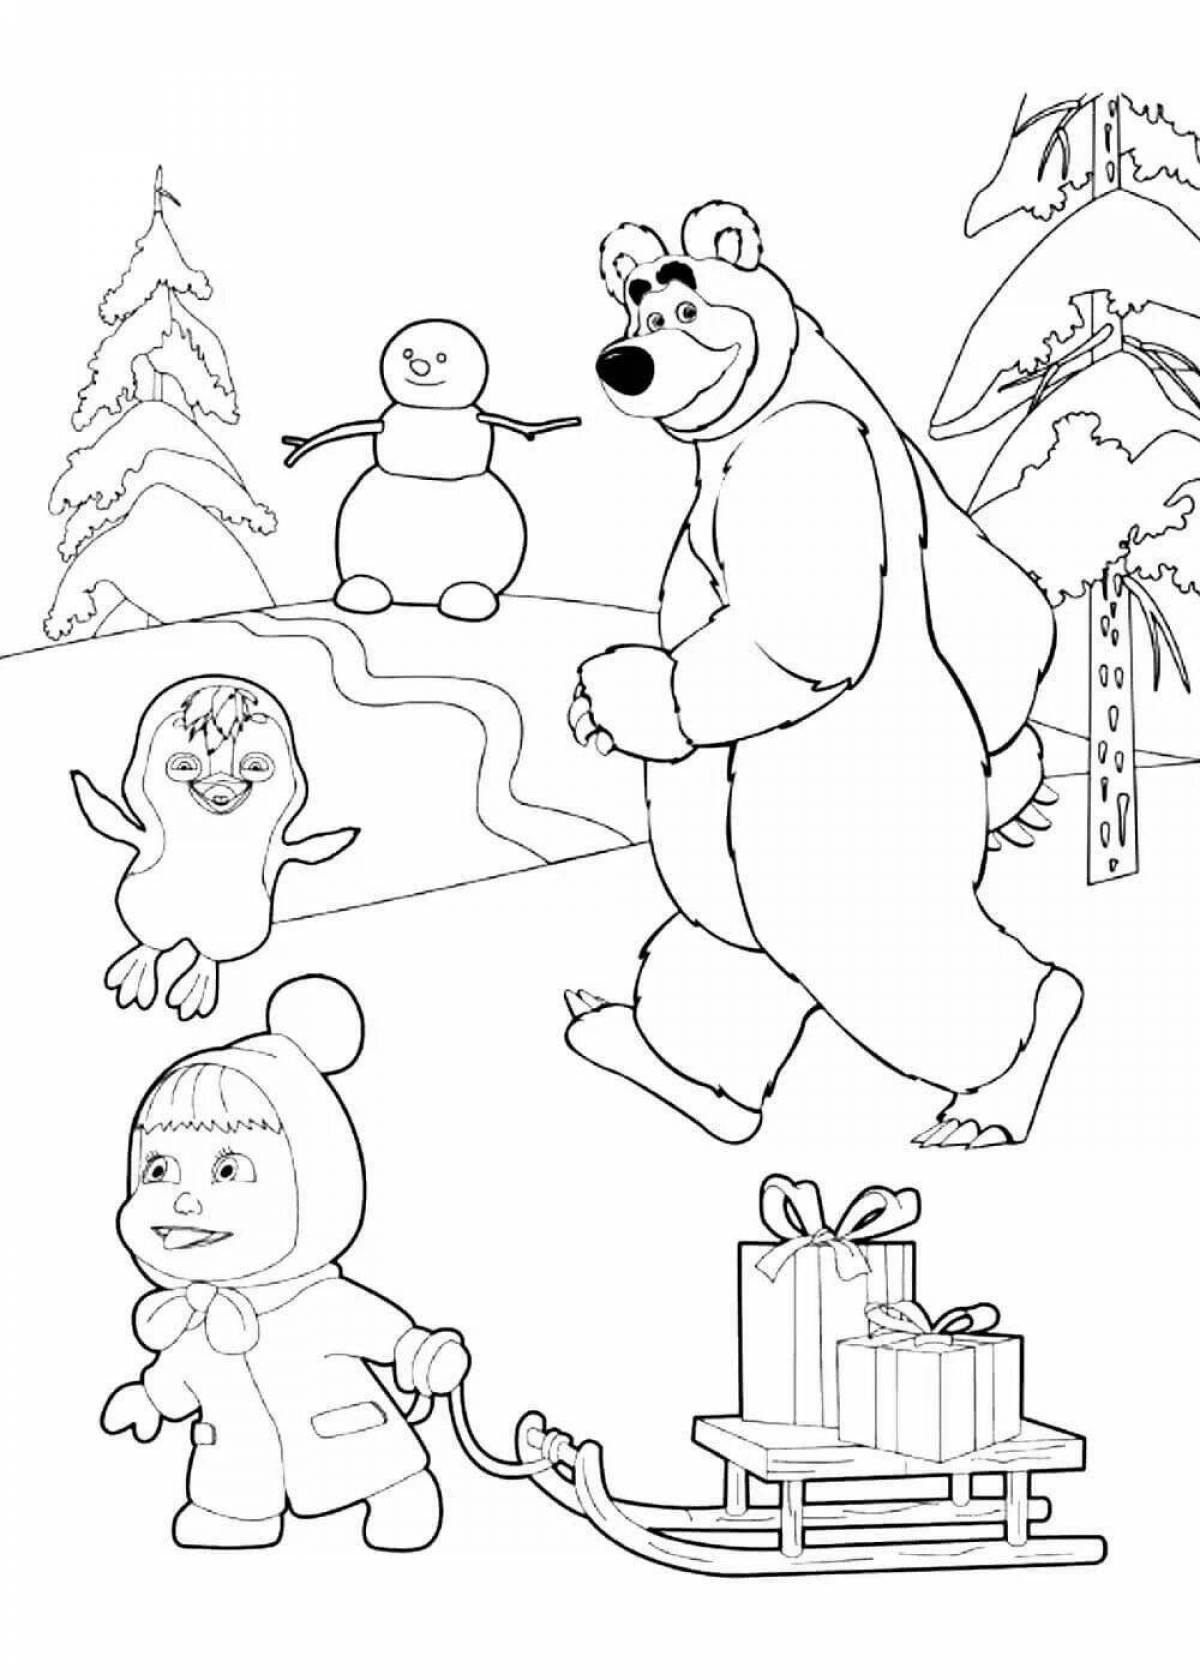 Fabulous Masha and the bear deluxe coloring book